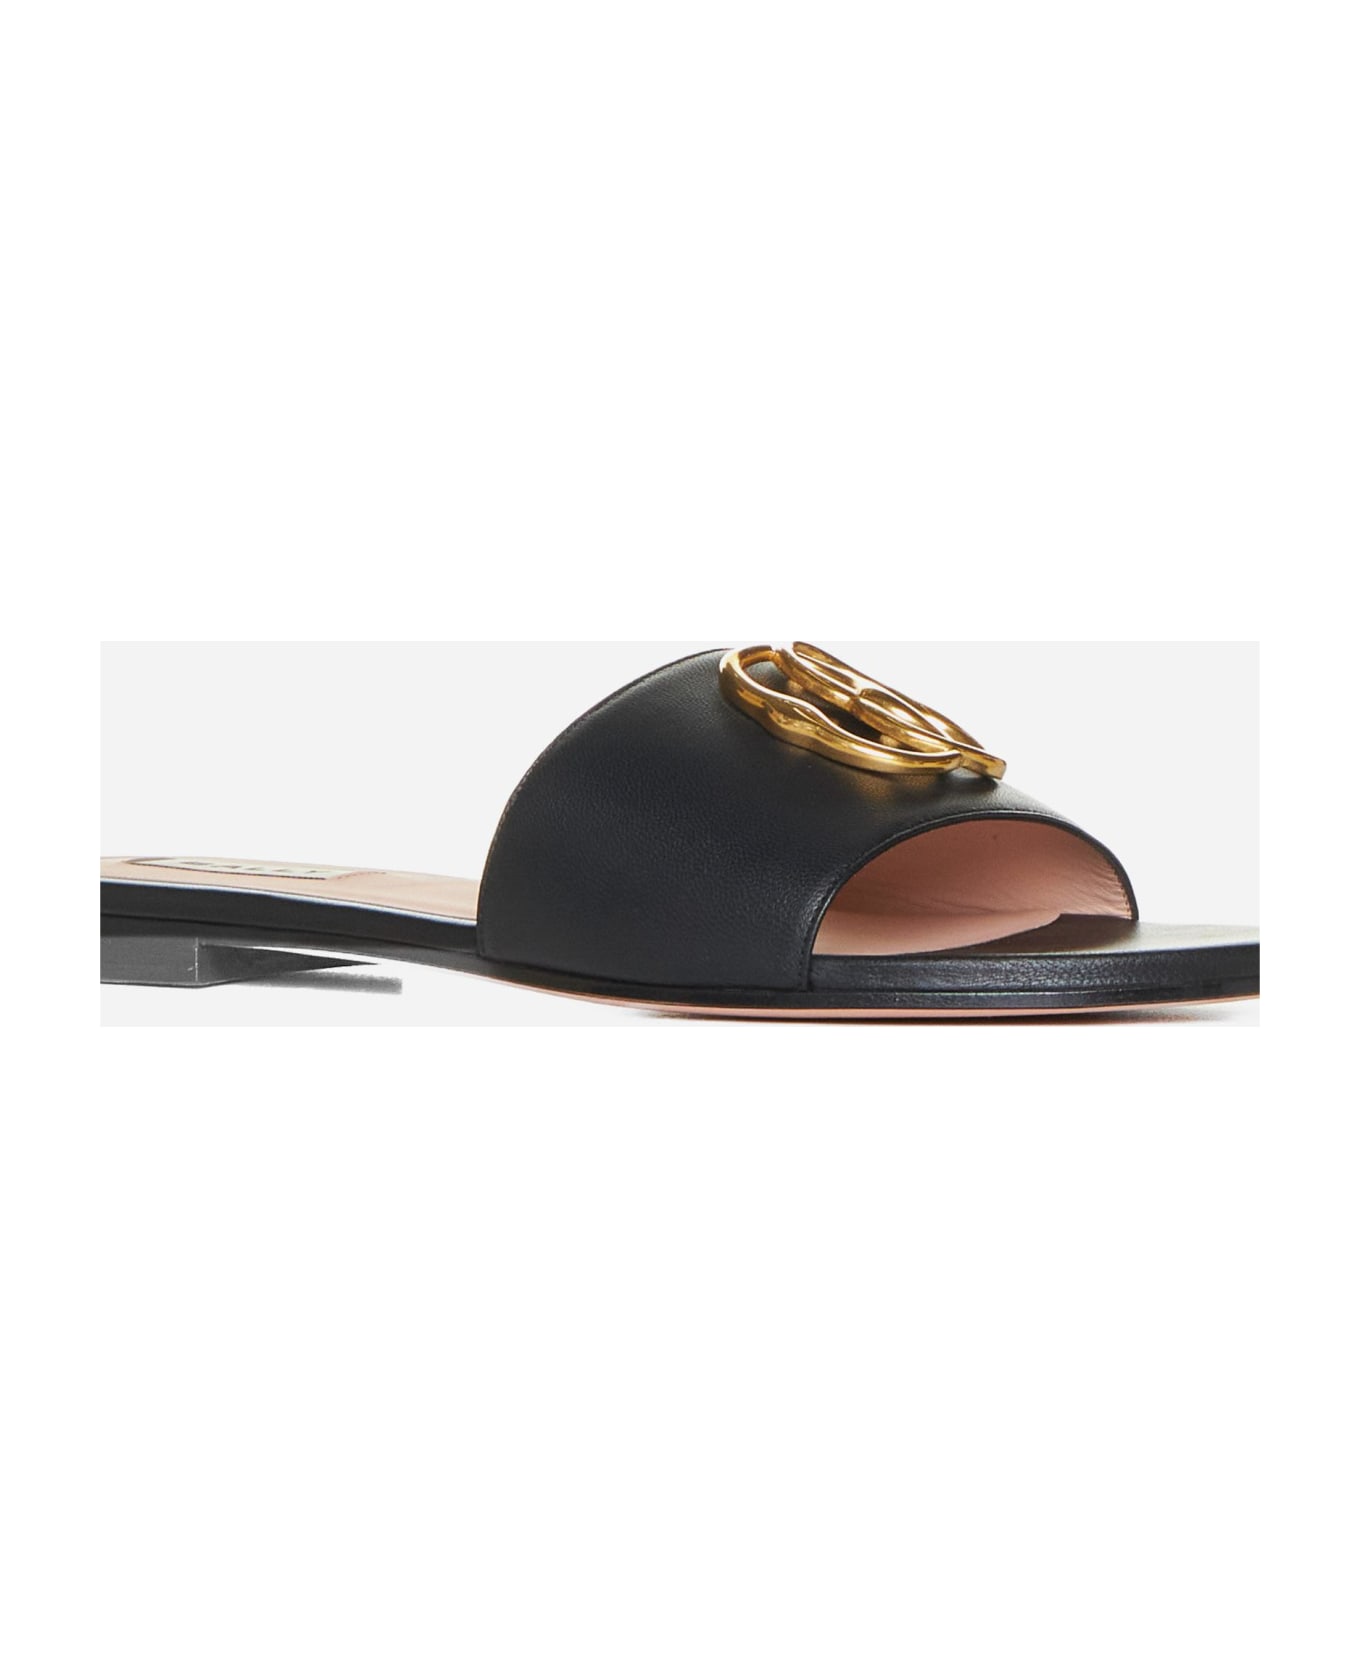 Bally Ghis Leather Flat Sandals - Black